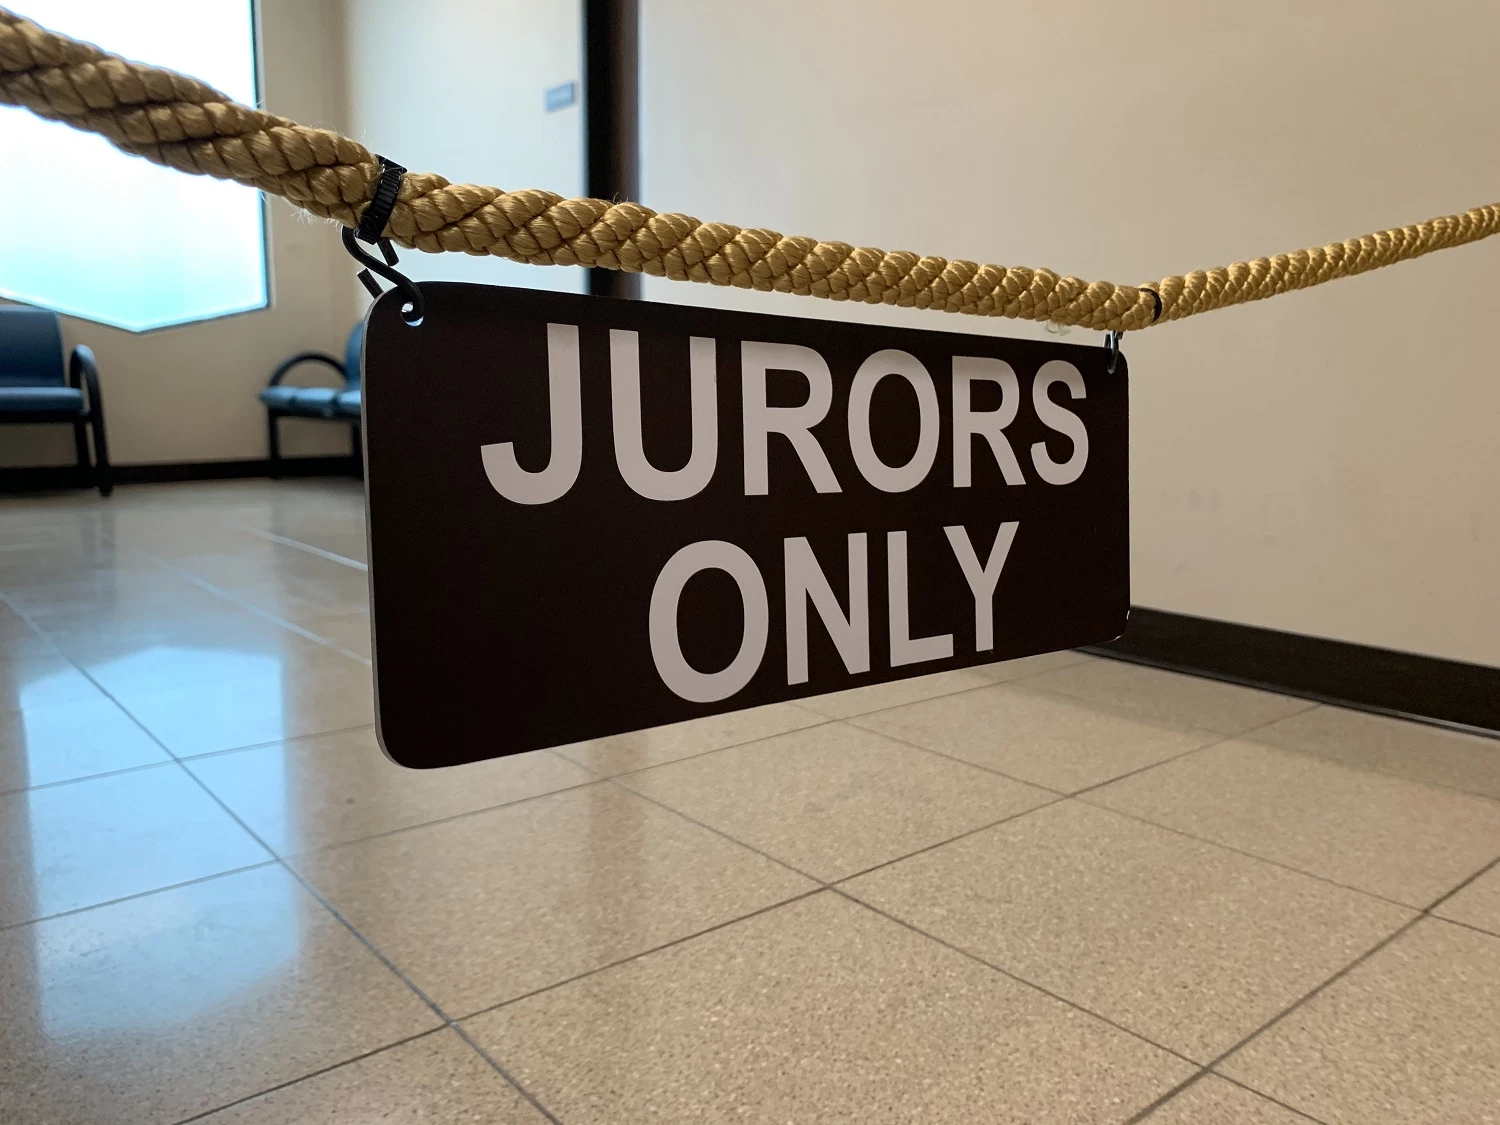 Jurors-only-sign-small